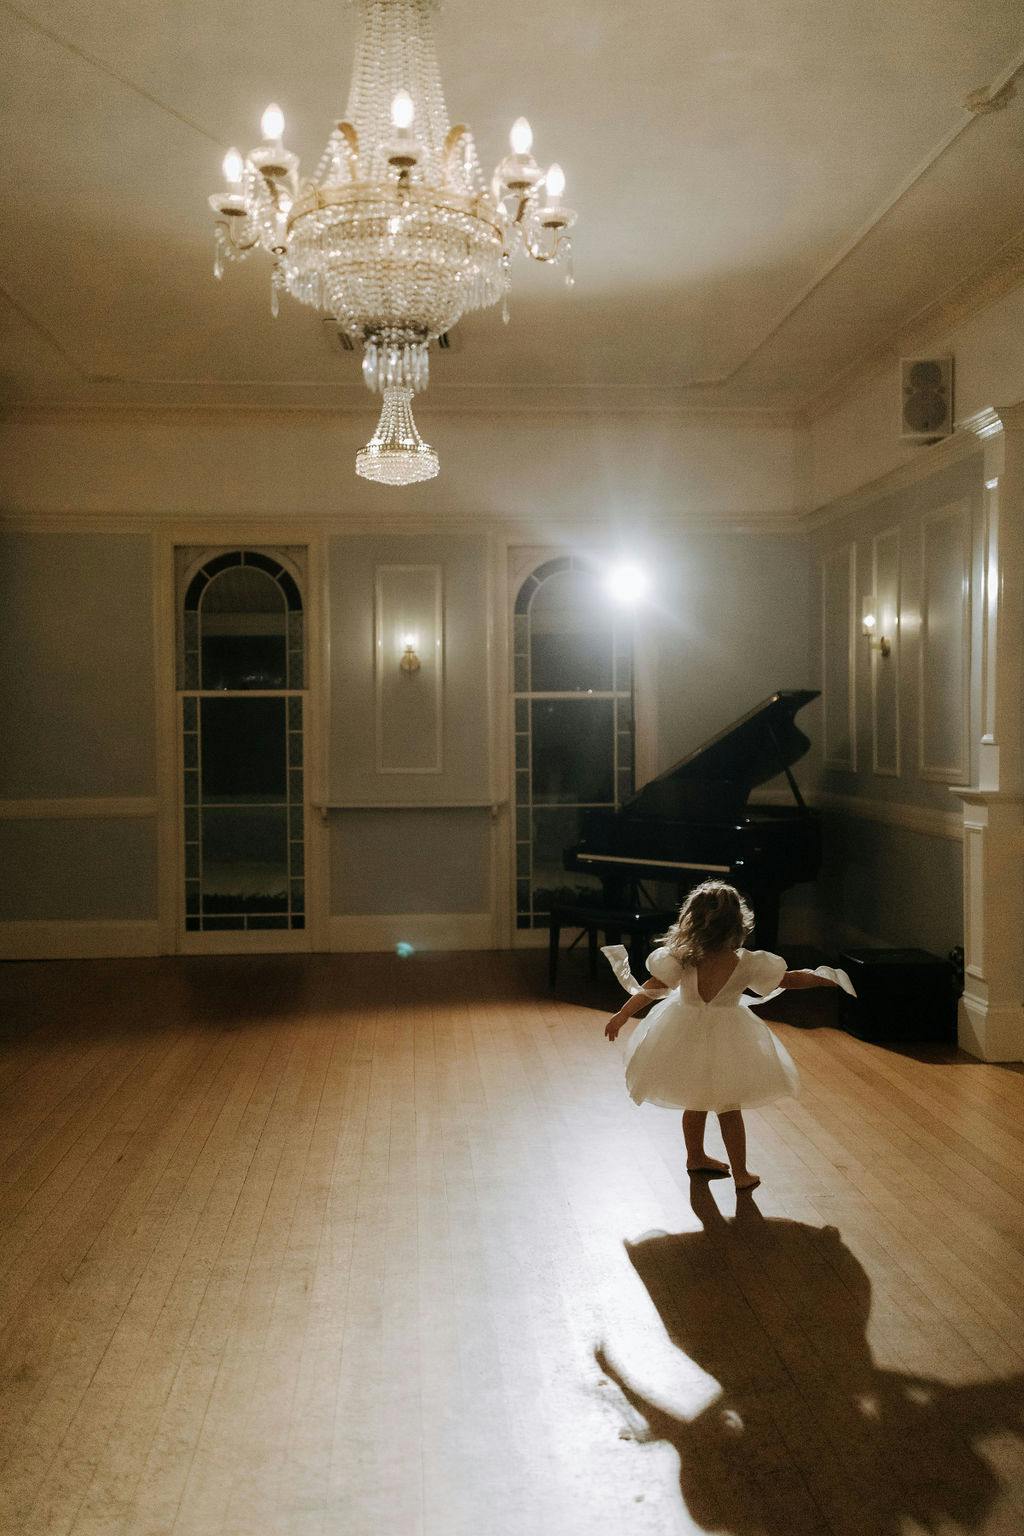 A young child in a white dress dances alone in a dimly lit, elegant room with high ceilings, a polished wooden floor, and classic wall paneling. A grand piano and an ornate chandelier add to the room's grandeur, while the child's shadow is cast on the floor.